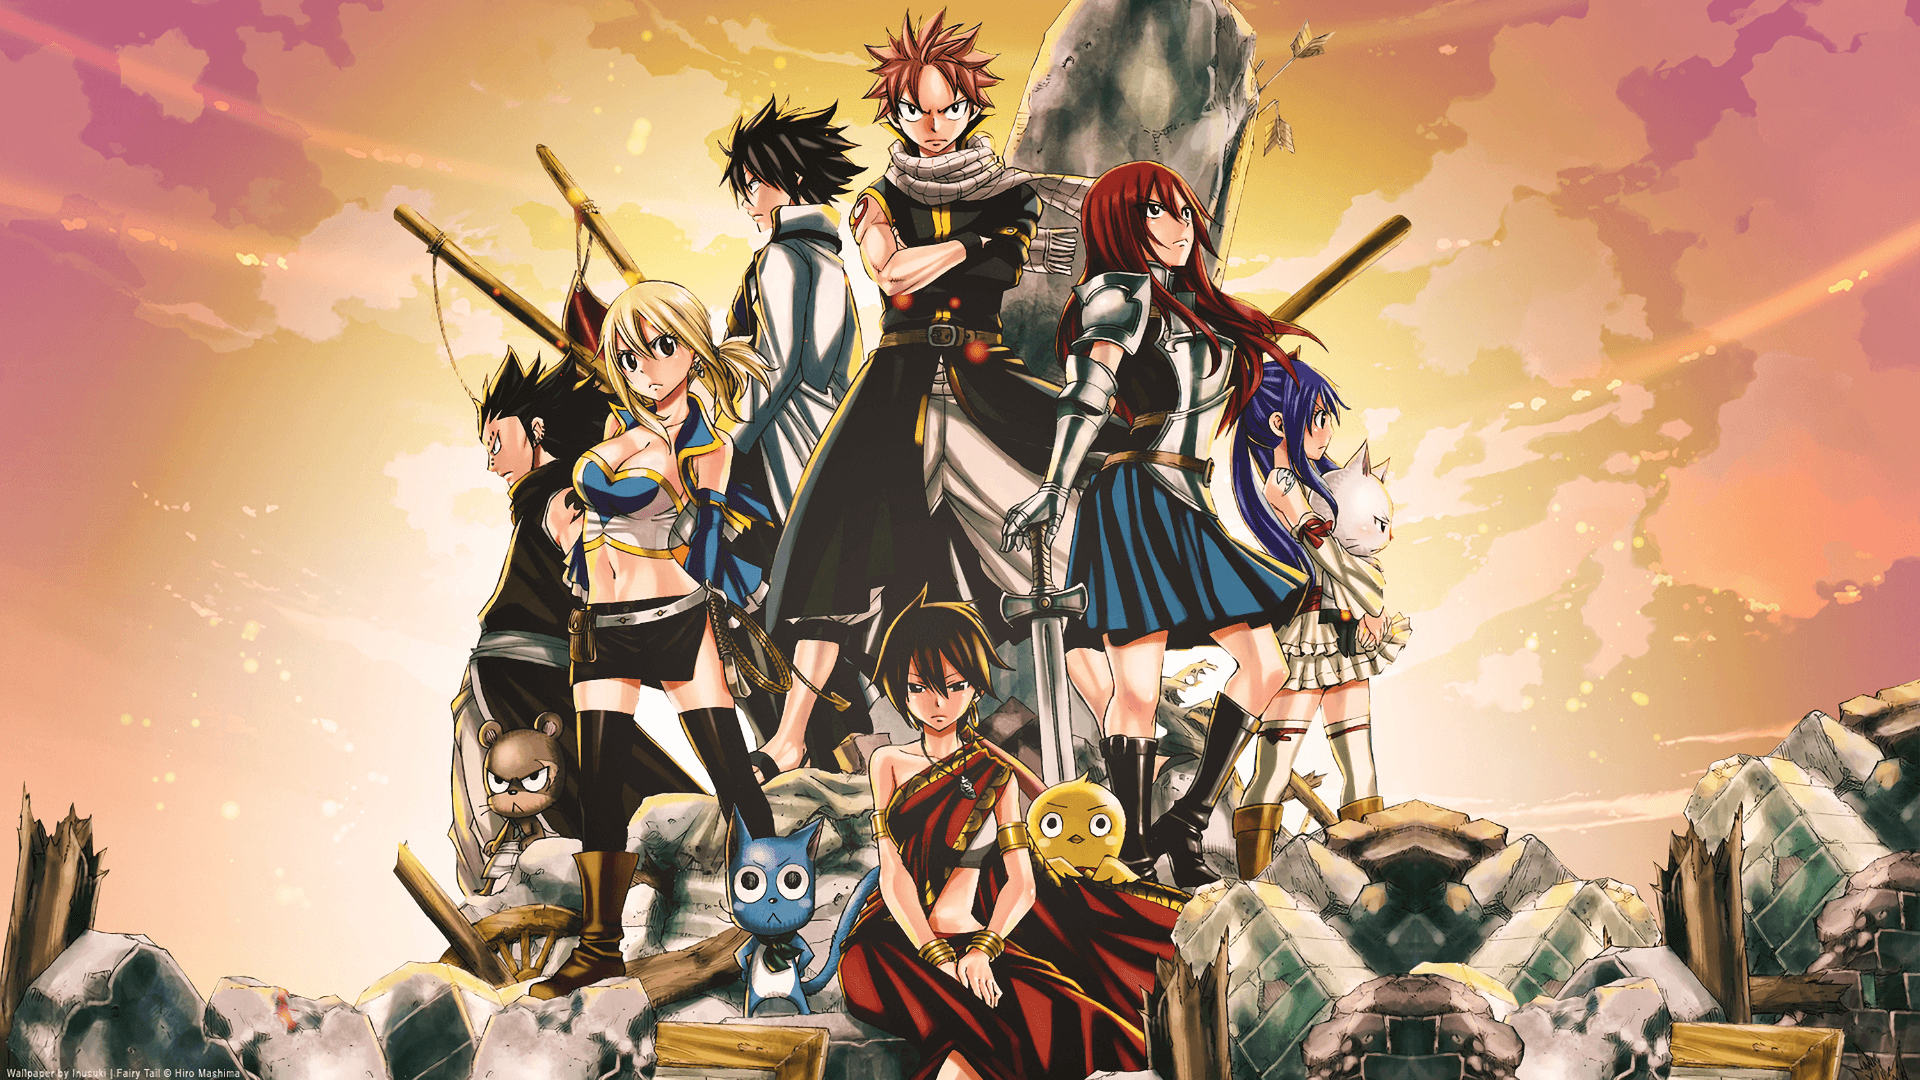 Fairy Tail Anime Wallpapers - Top Free